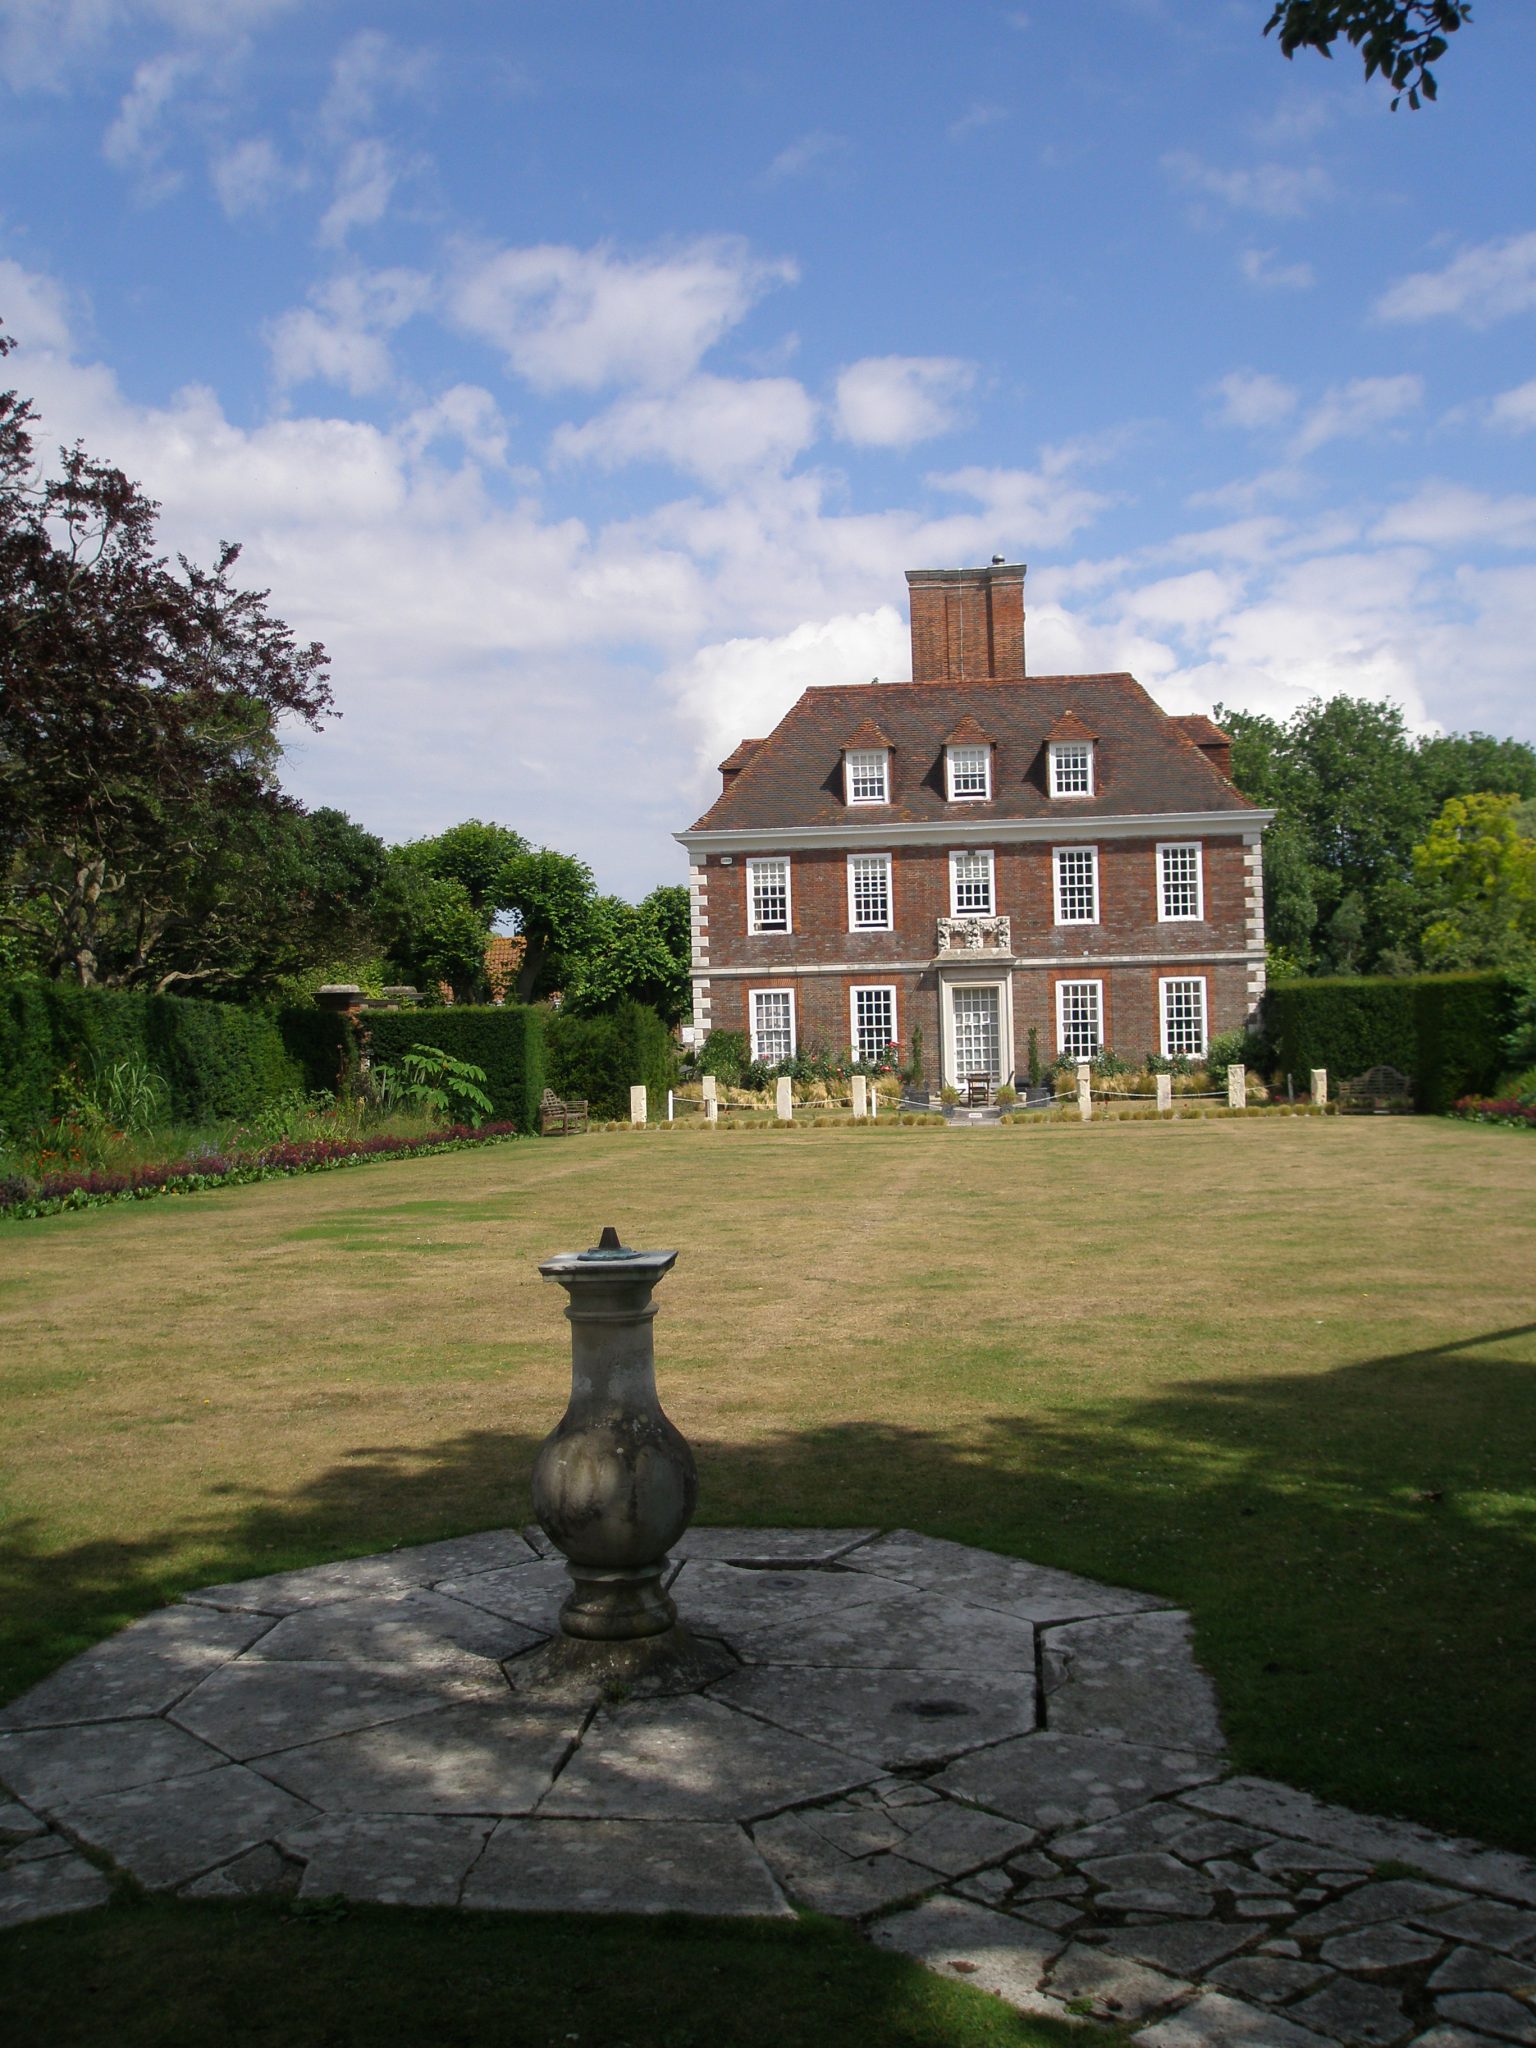 At one end of the Spring Garden, behind tall yew hedges, is the Bowling Lawn. which frames the best view of the House. This is the classic view of The Salutation.